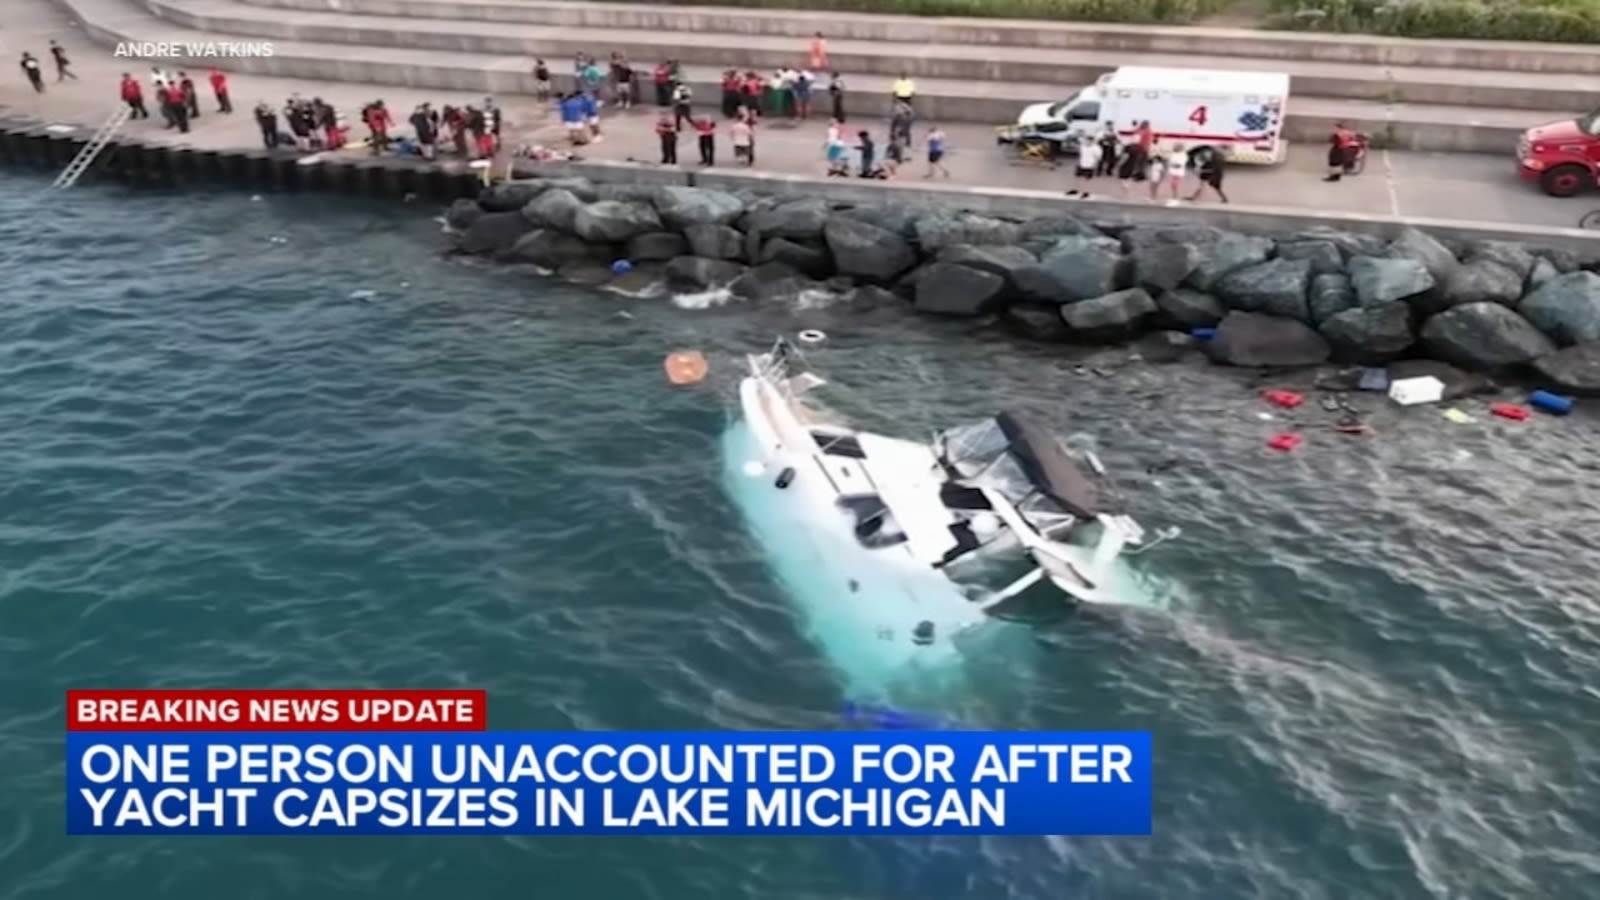 Search resumes for missing man after yacht capsizes, sinks in Lake Michigan near 31st Street Harbor